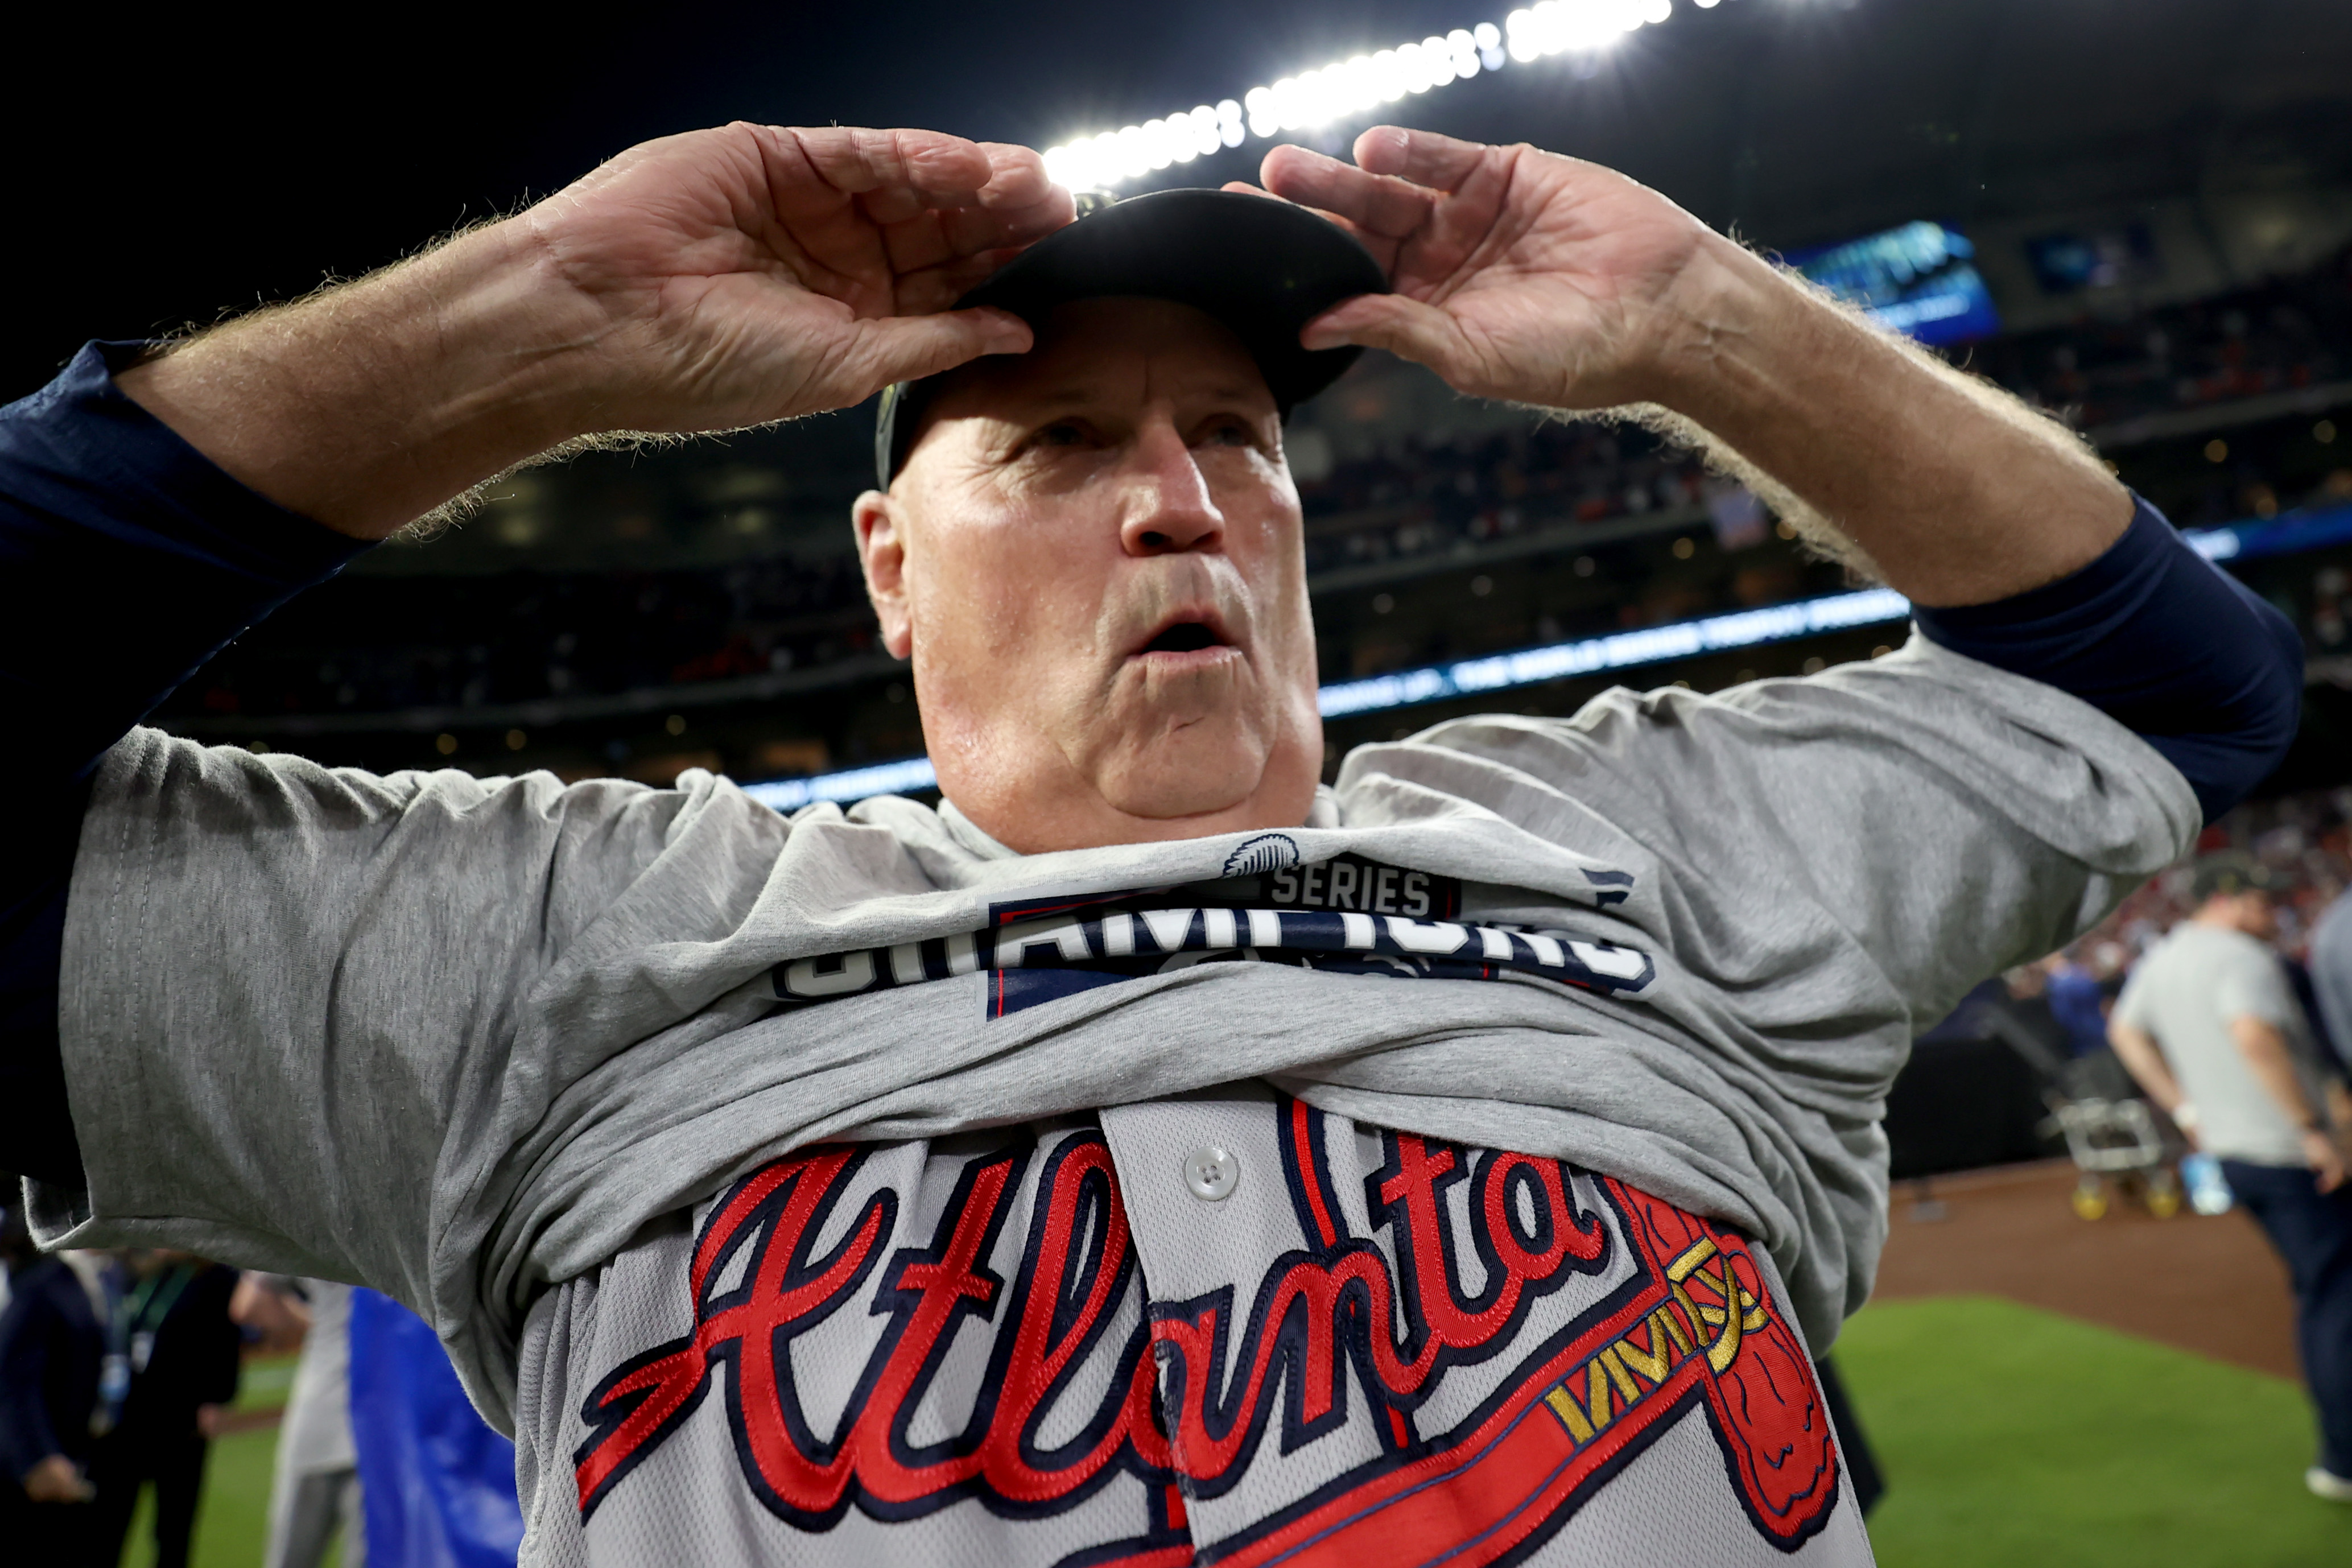 Braves manager Brian Snitker stayed with a team that didn't always